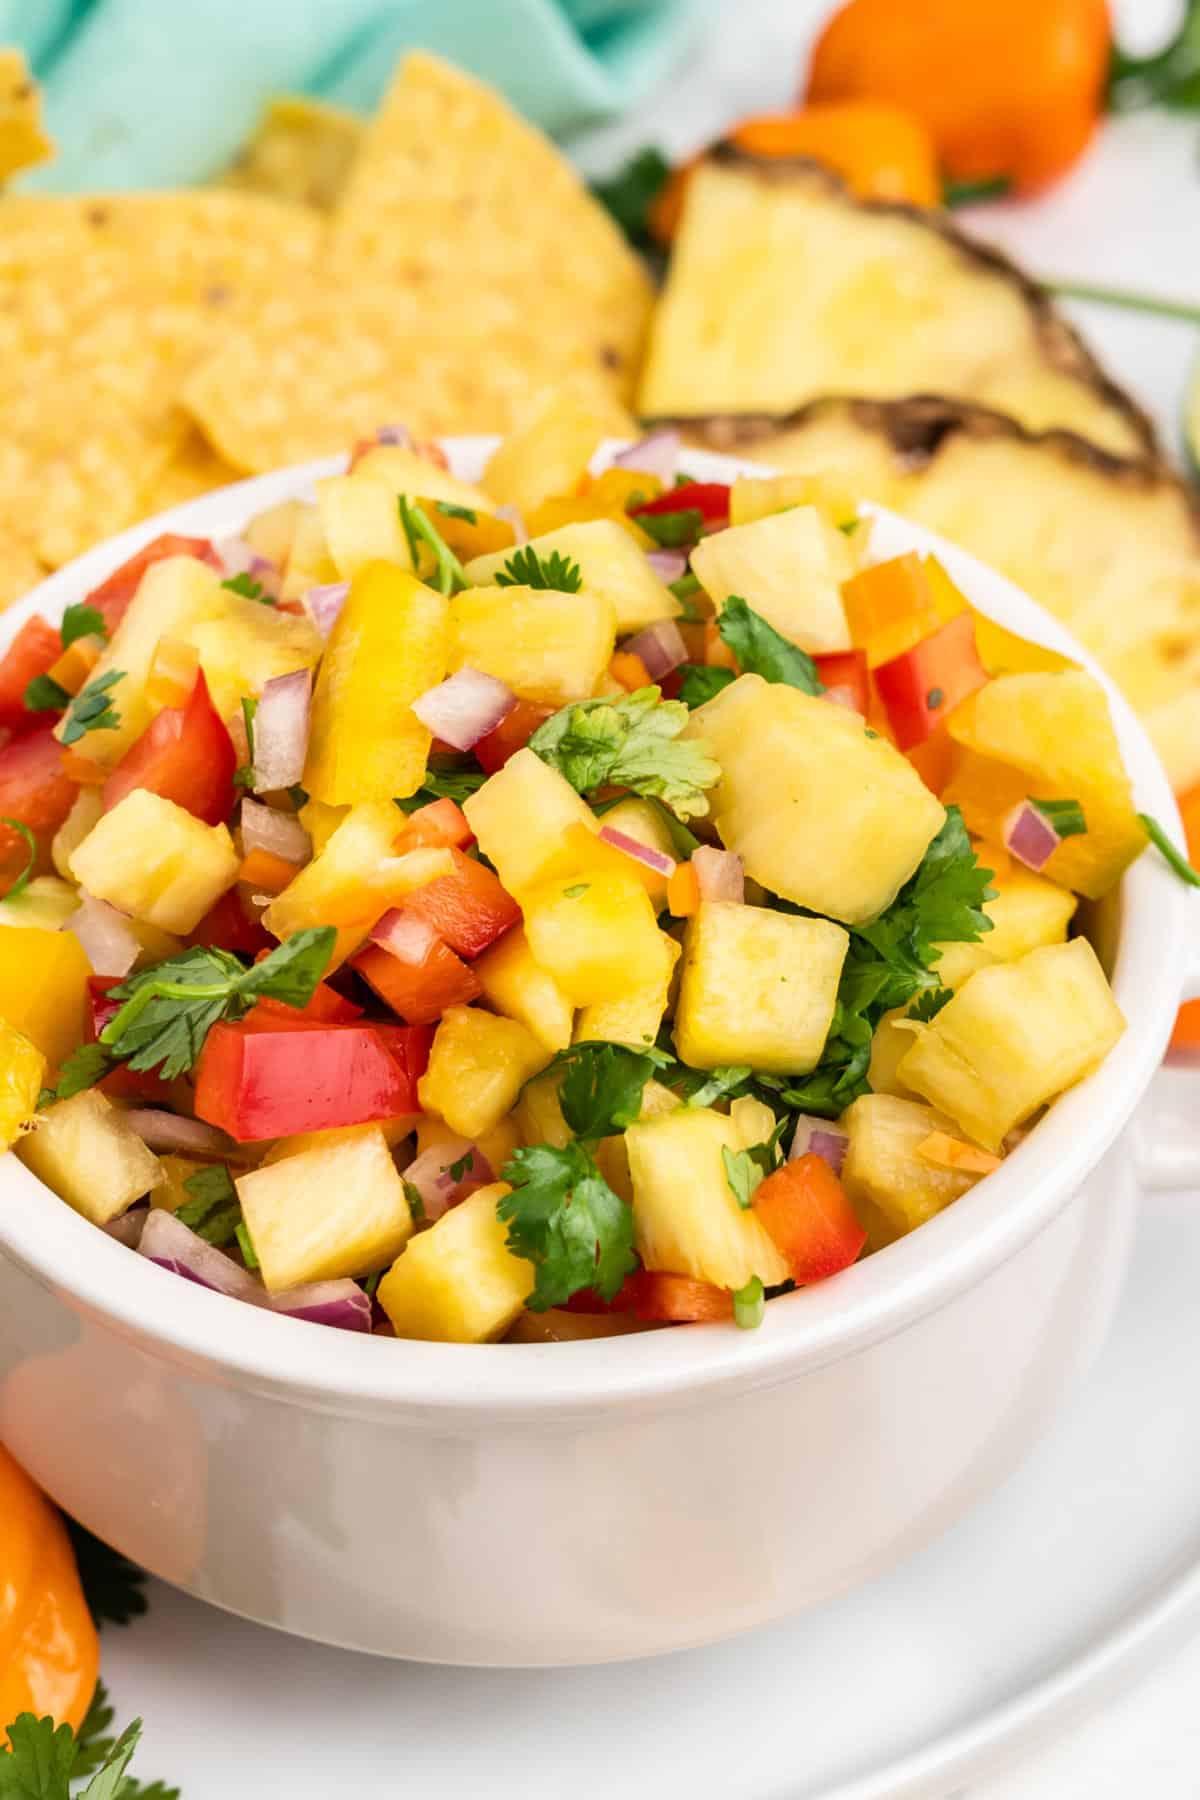 Bowl of pineapple pico de gallo on a plate with chips.